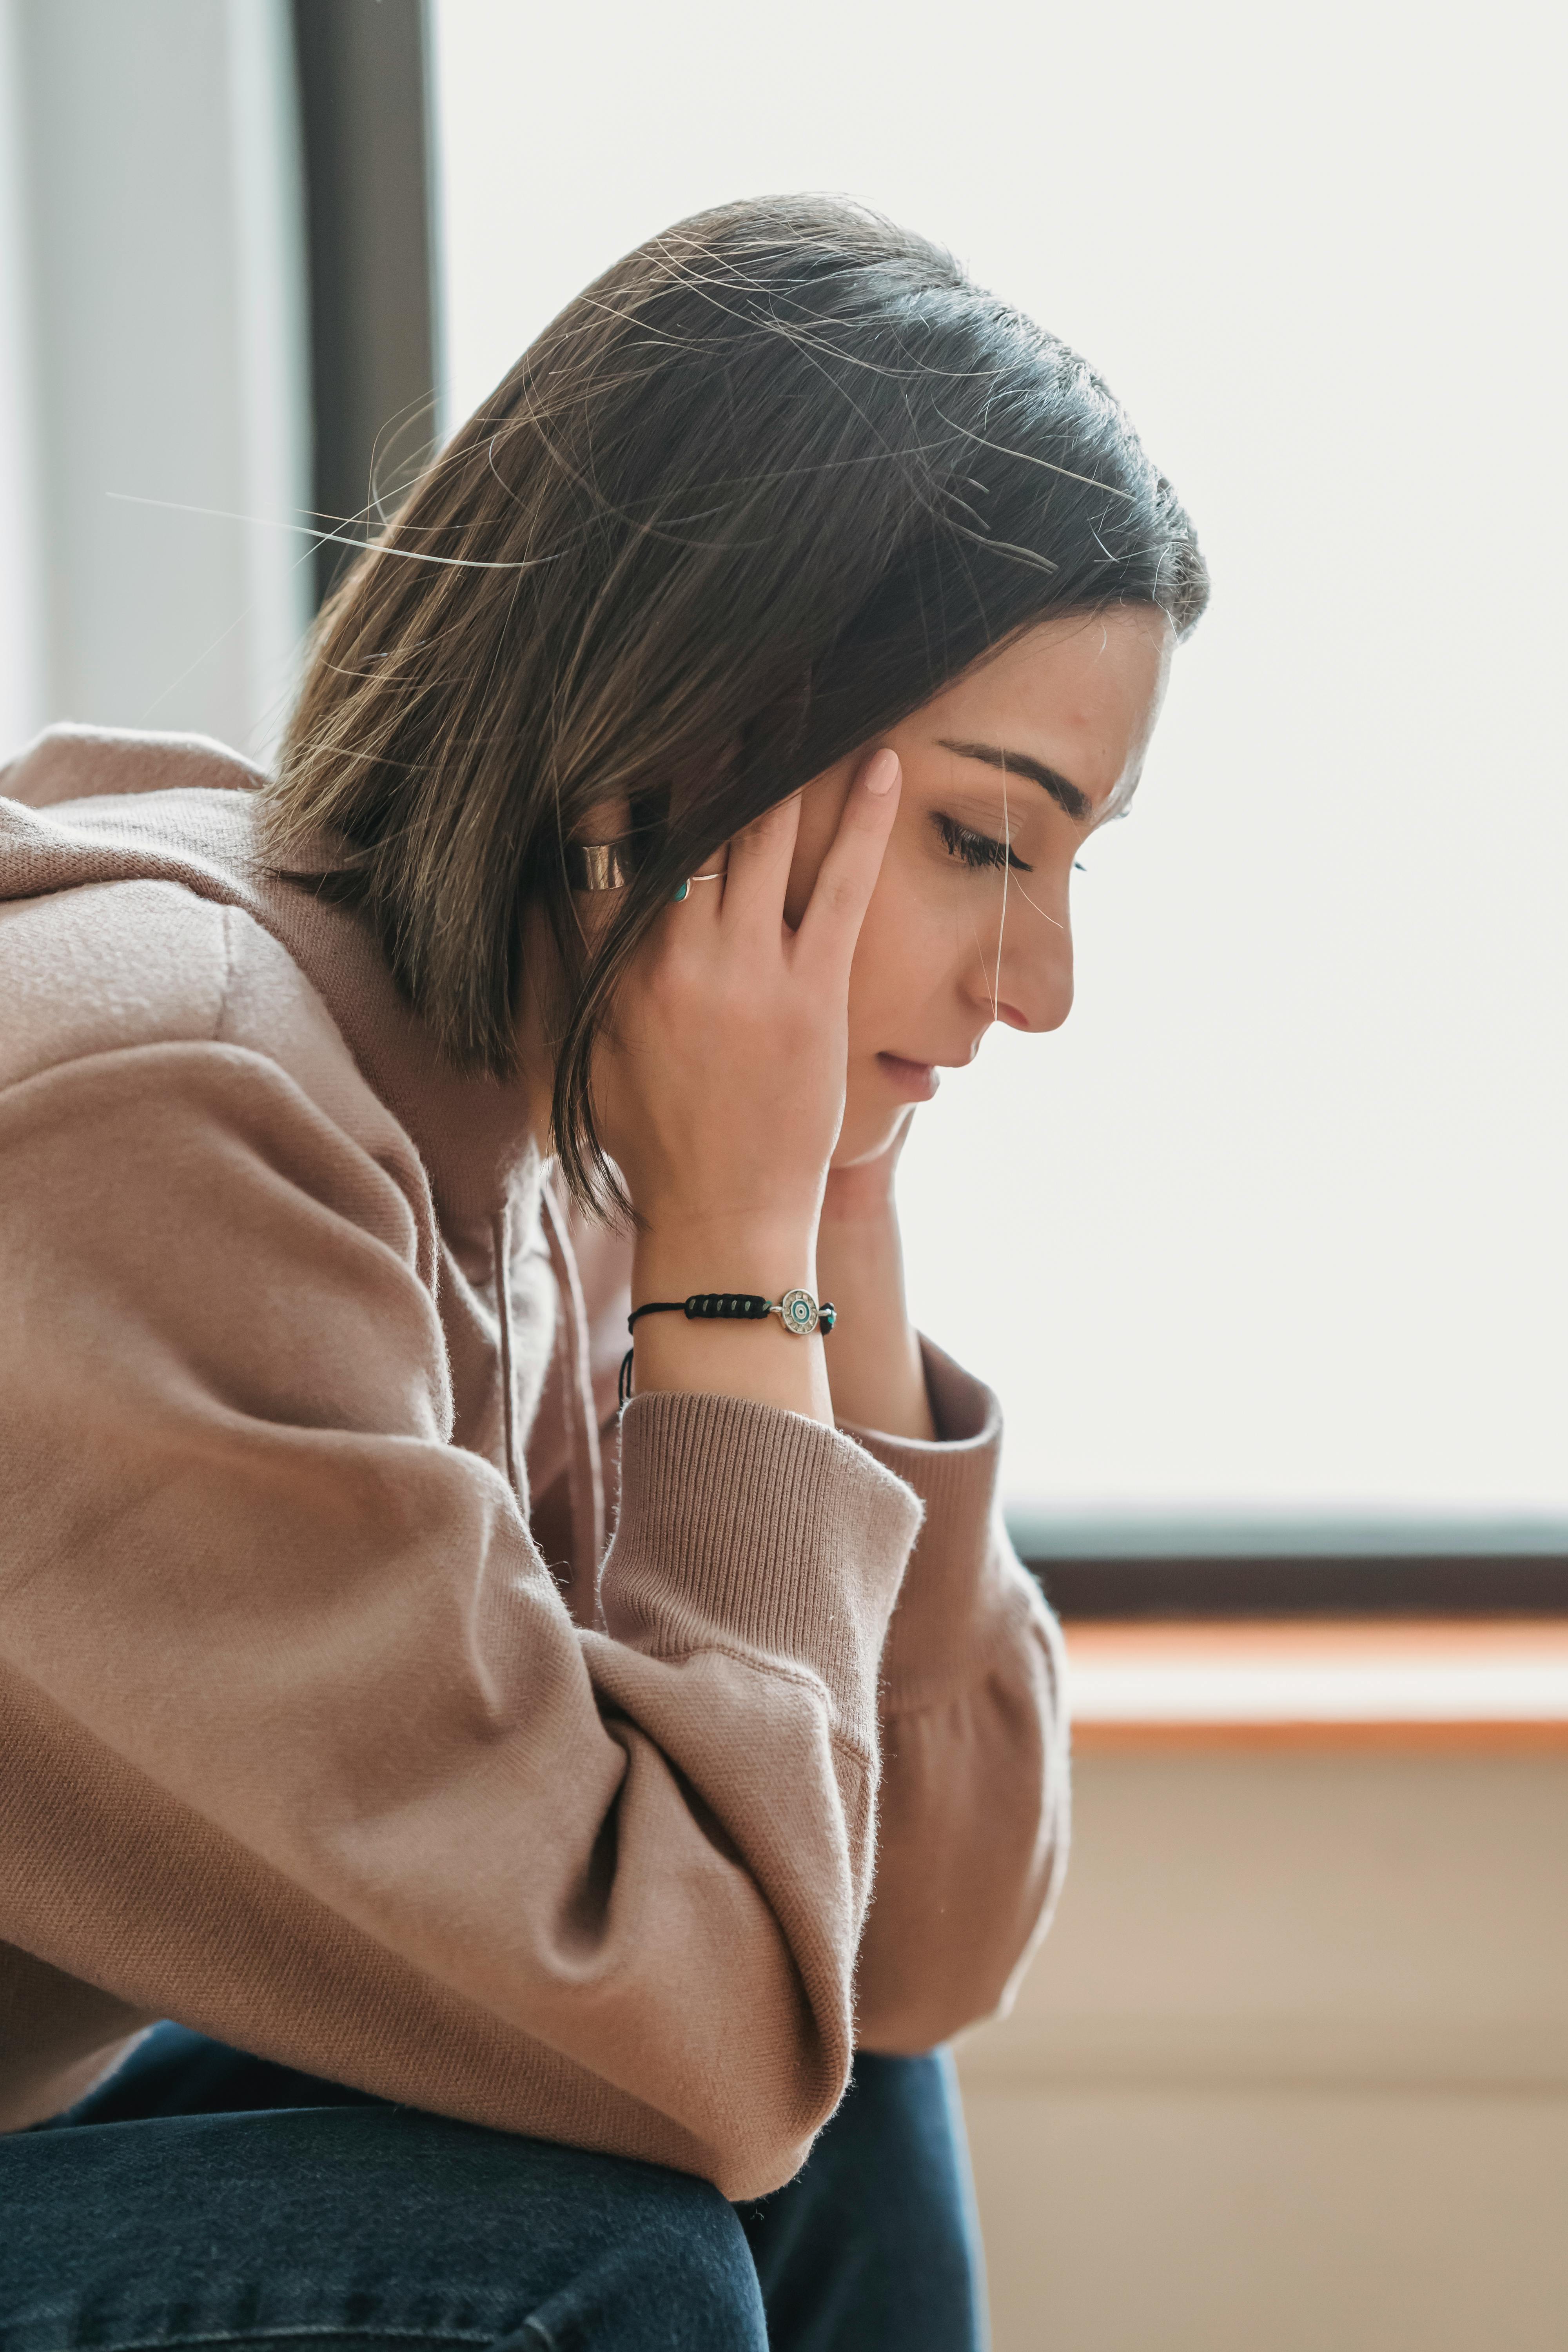 An upset and distressed woman | Source: Pexels